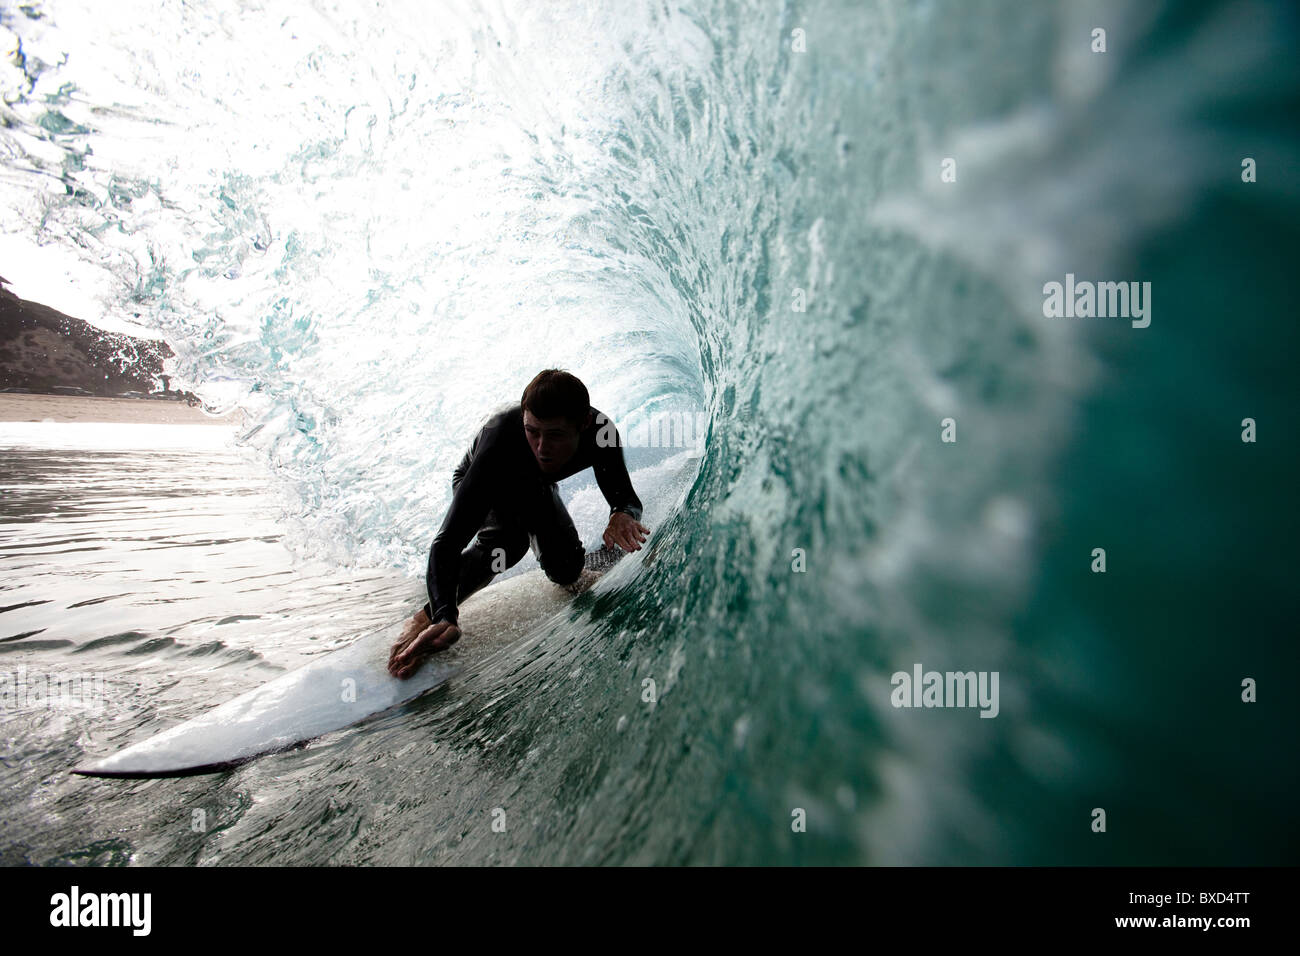 A male surfer navigates the barrel while surfing at Westward in Malibu, California. Stock Photo